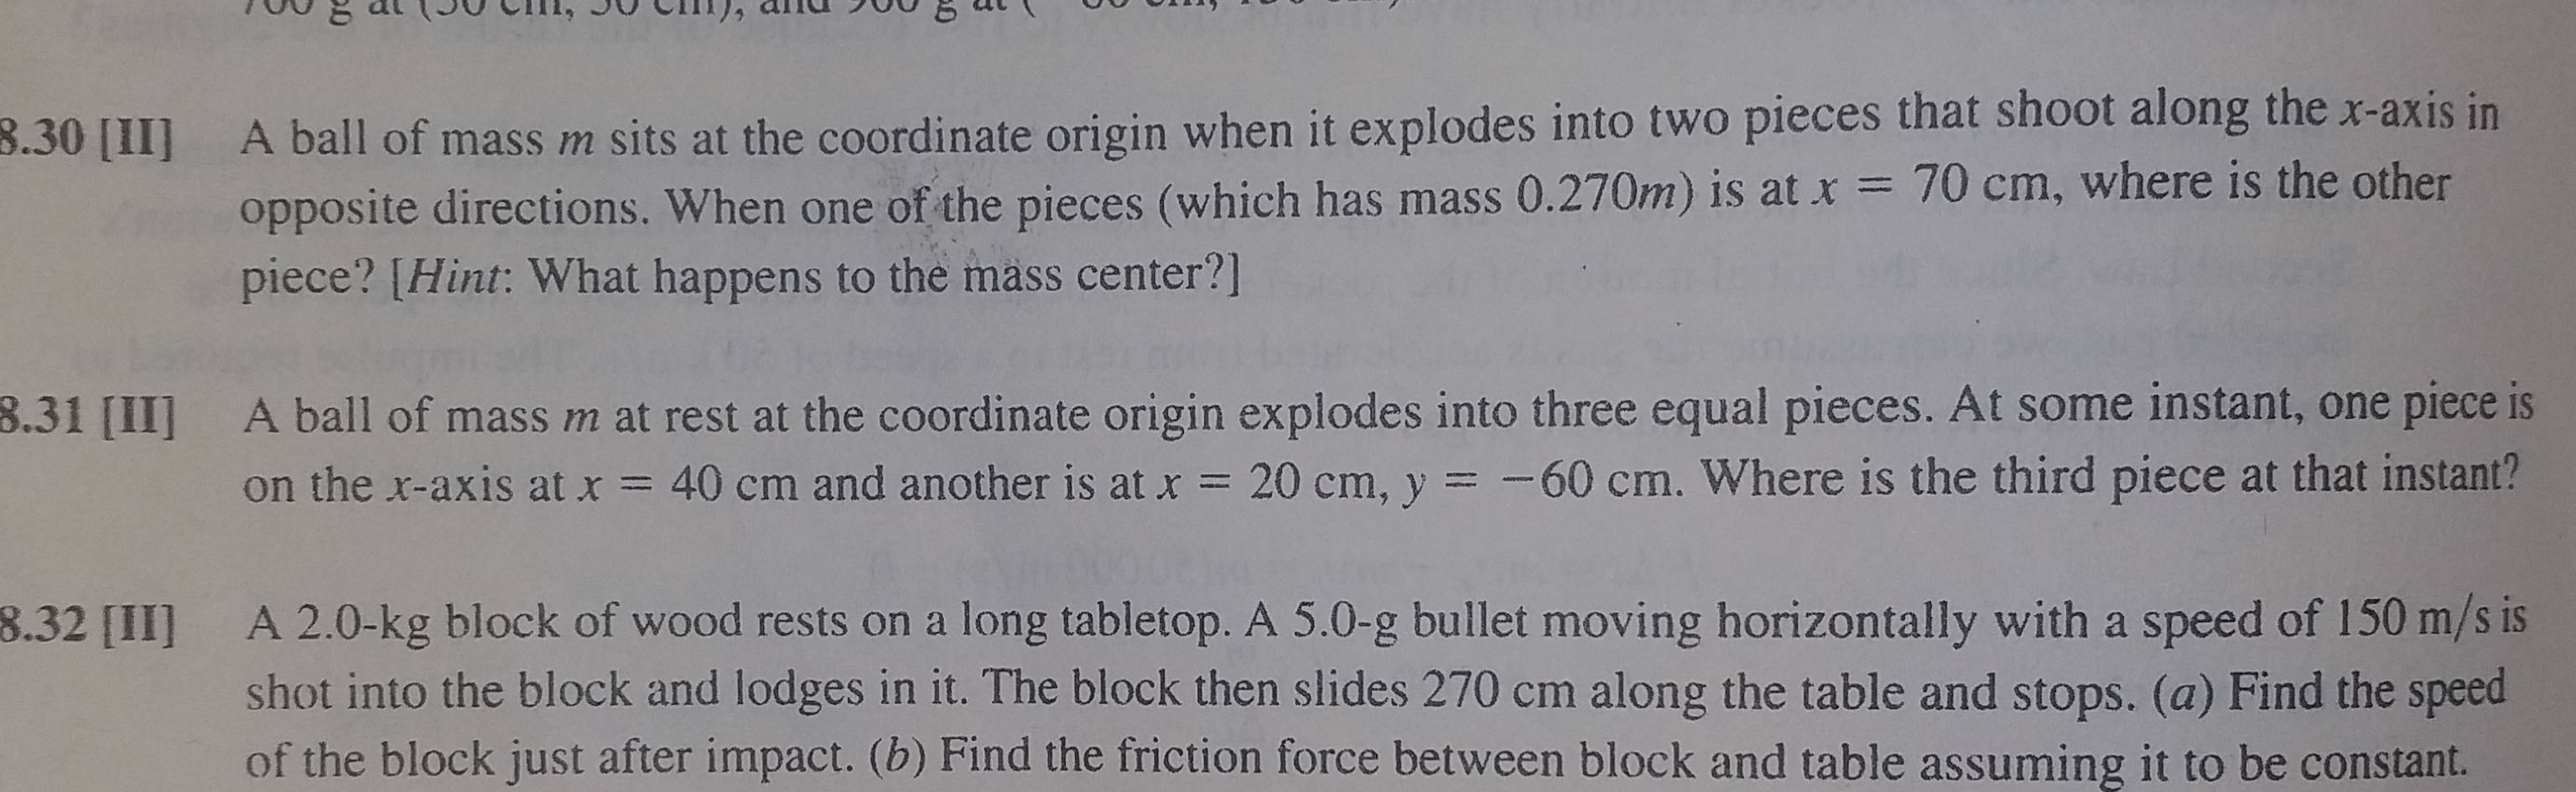 A ball of mass m sits at the coordinate origin when it explodes into two pieces that shoot along the x-axis in
opposite directions. When one of the pieces (which has mass 0.270m) is at x = 70 cm, where is the other
piece? [Hint: What happens to the mass center?]
